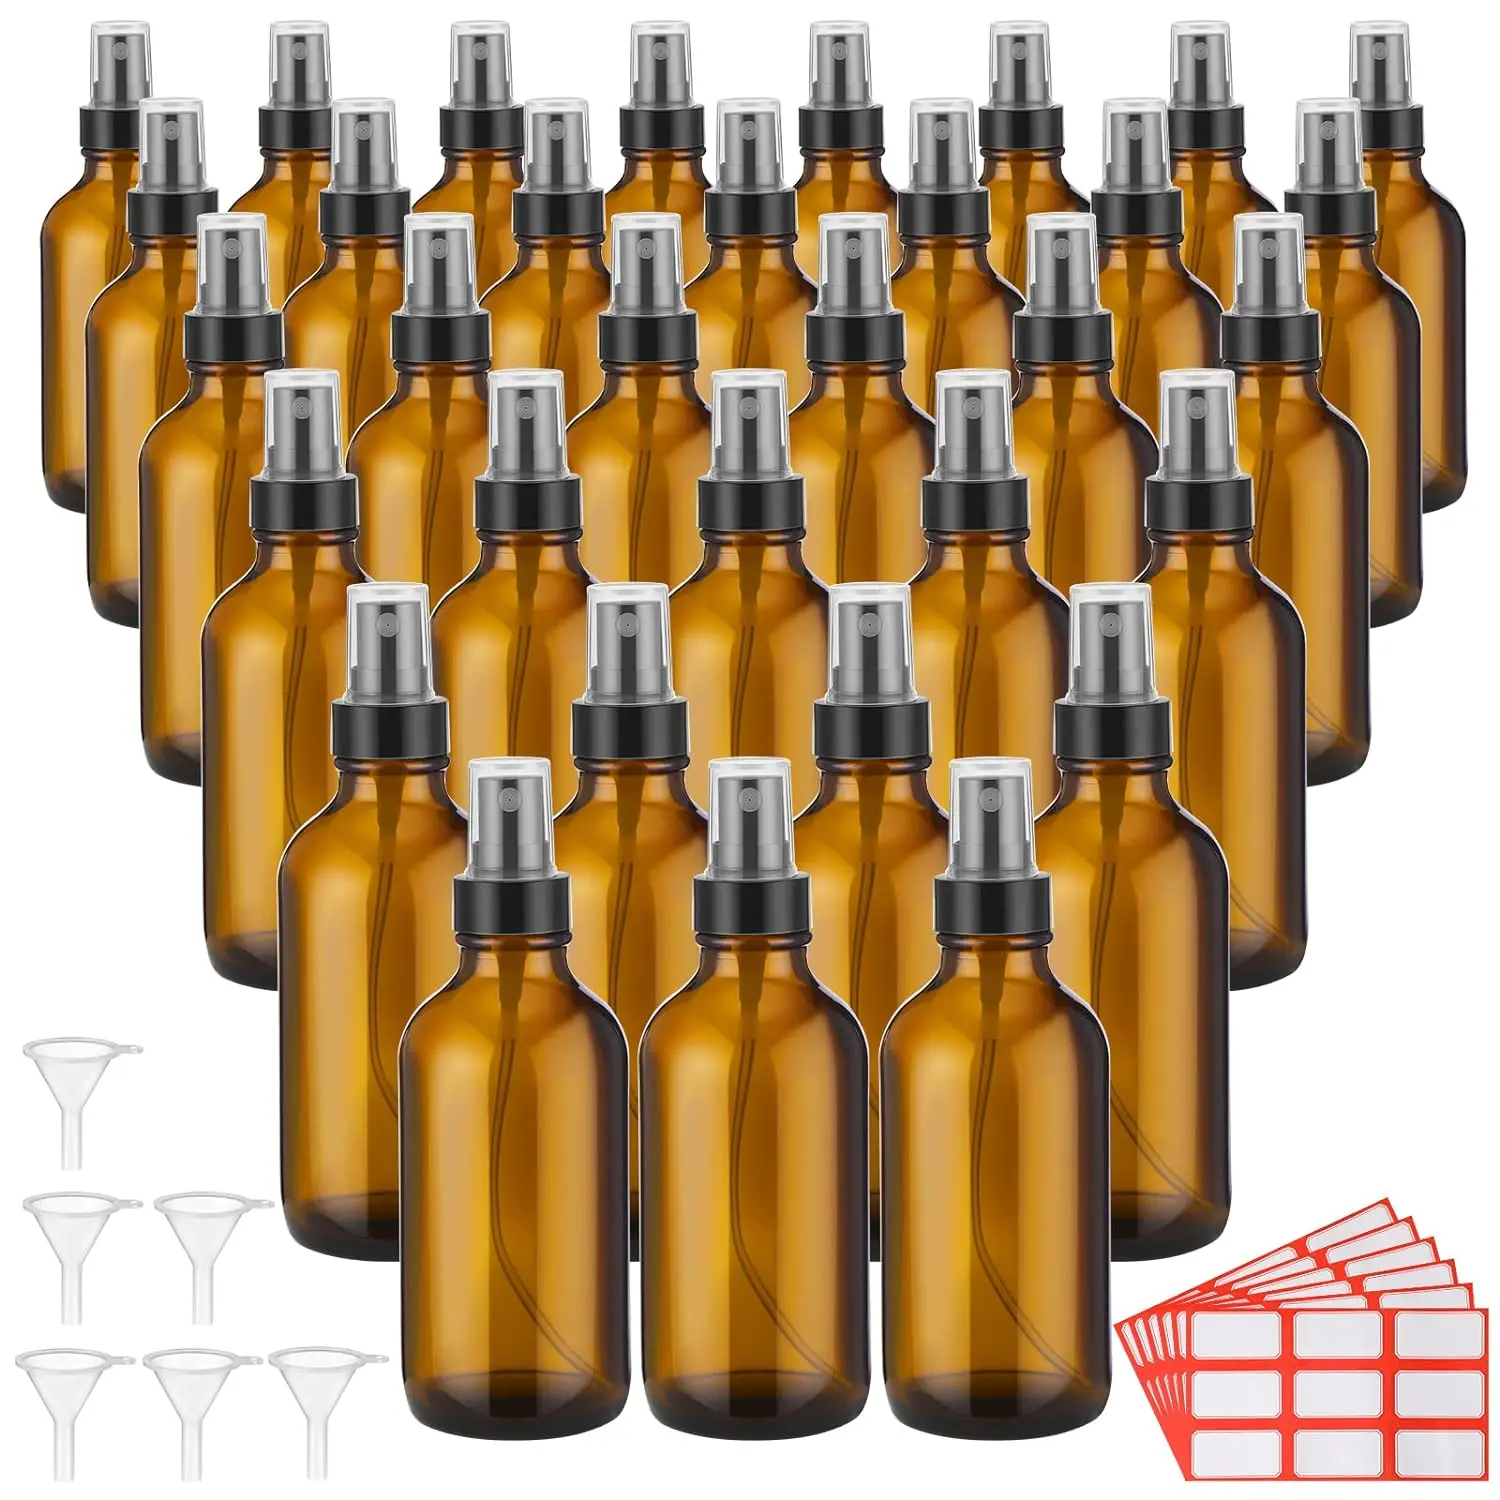 Refillable Amber Glass Spray Bottle for Perfume Essential Oil 1pcs 5ml-100ml with Atomizer Sprayer